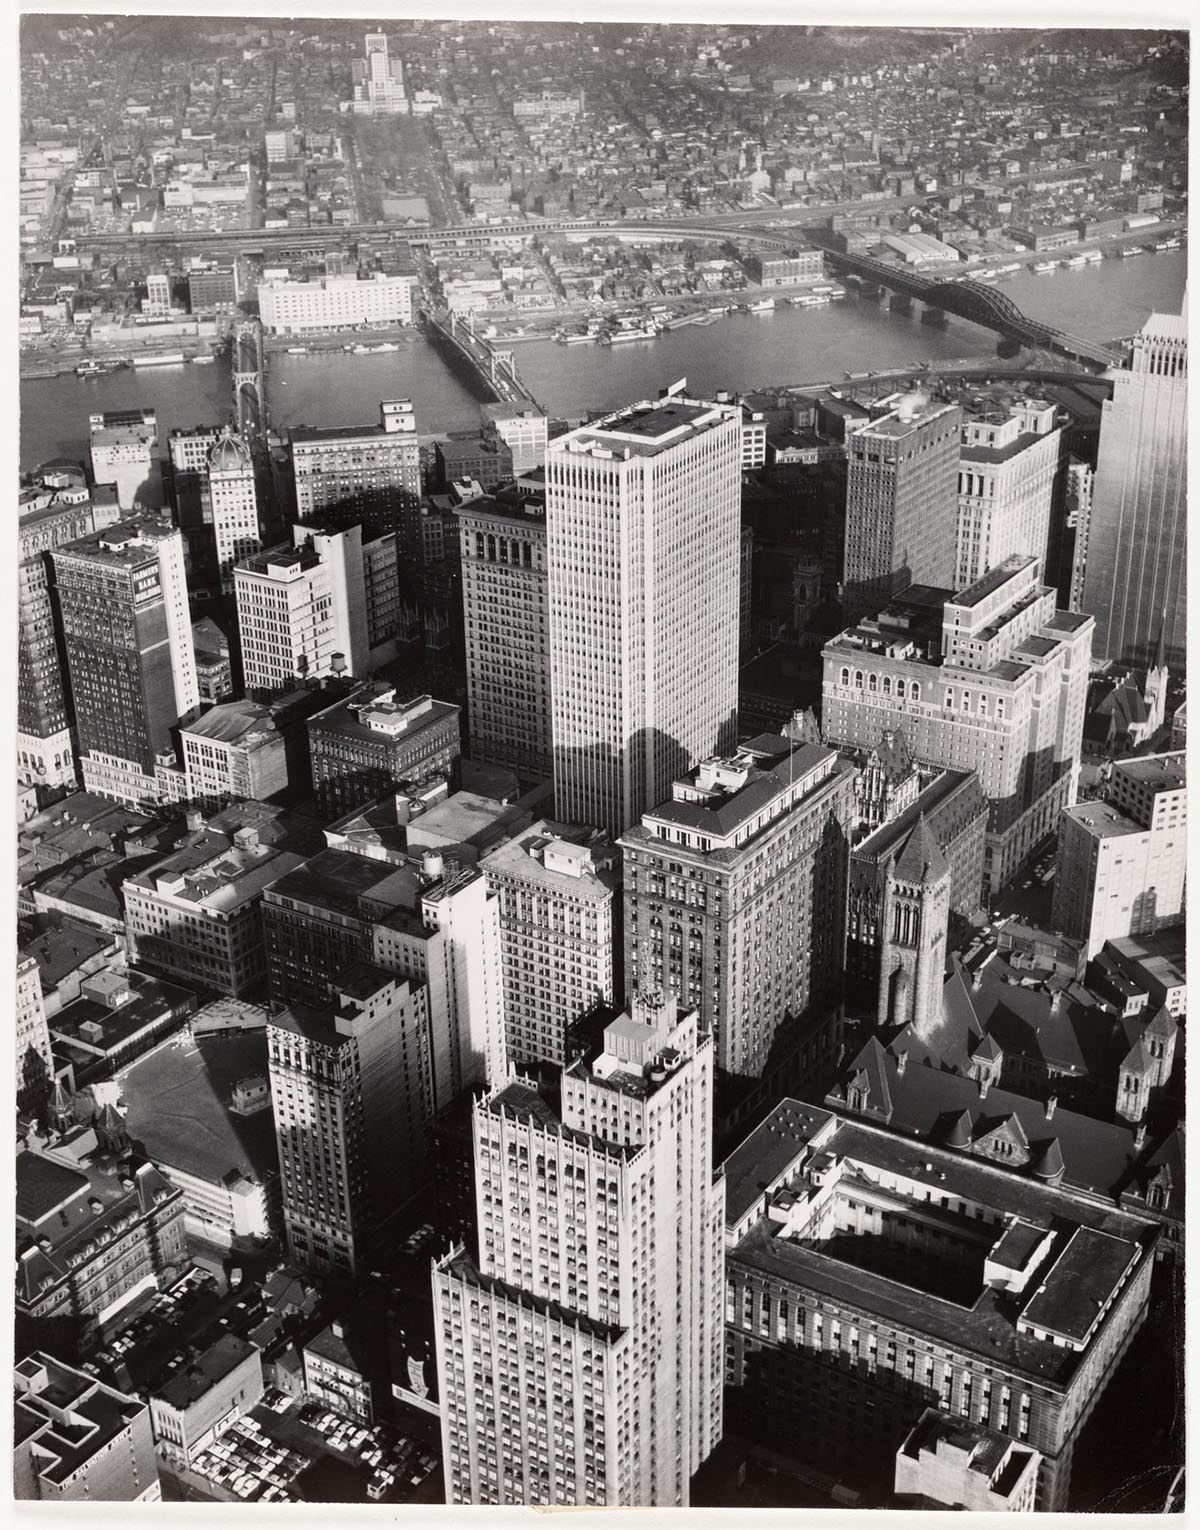 A black-and-white aerial photograph of the city of Pittsburgh looks down on a cluster of skyscrapers.